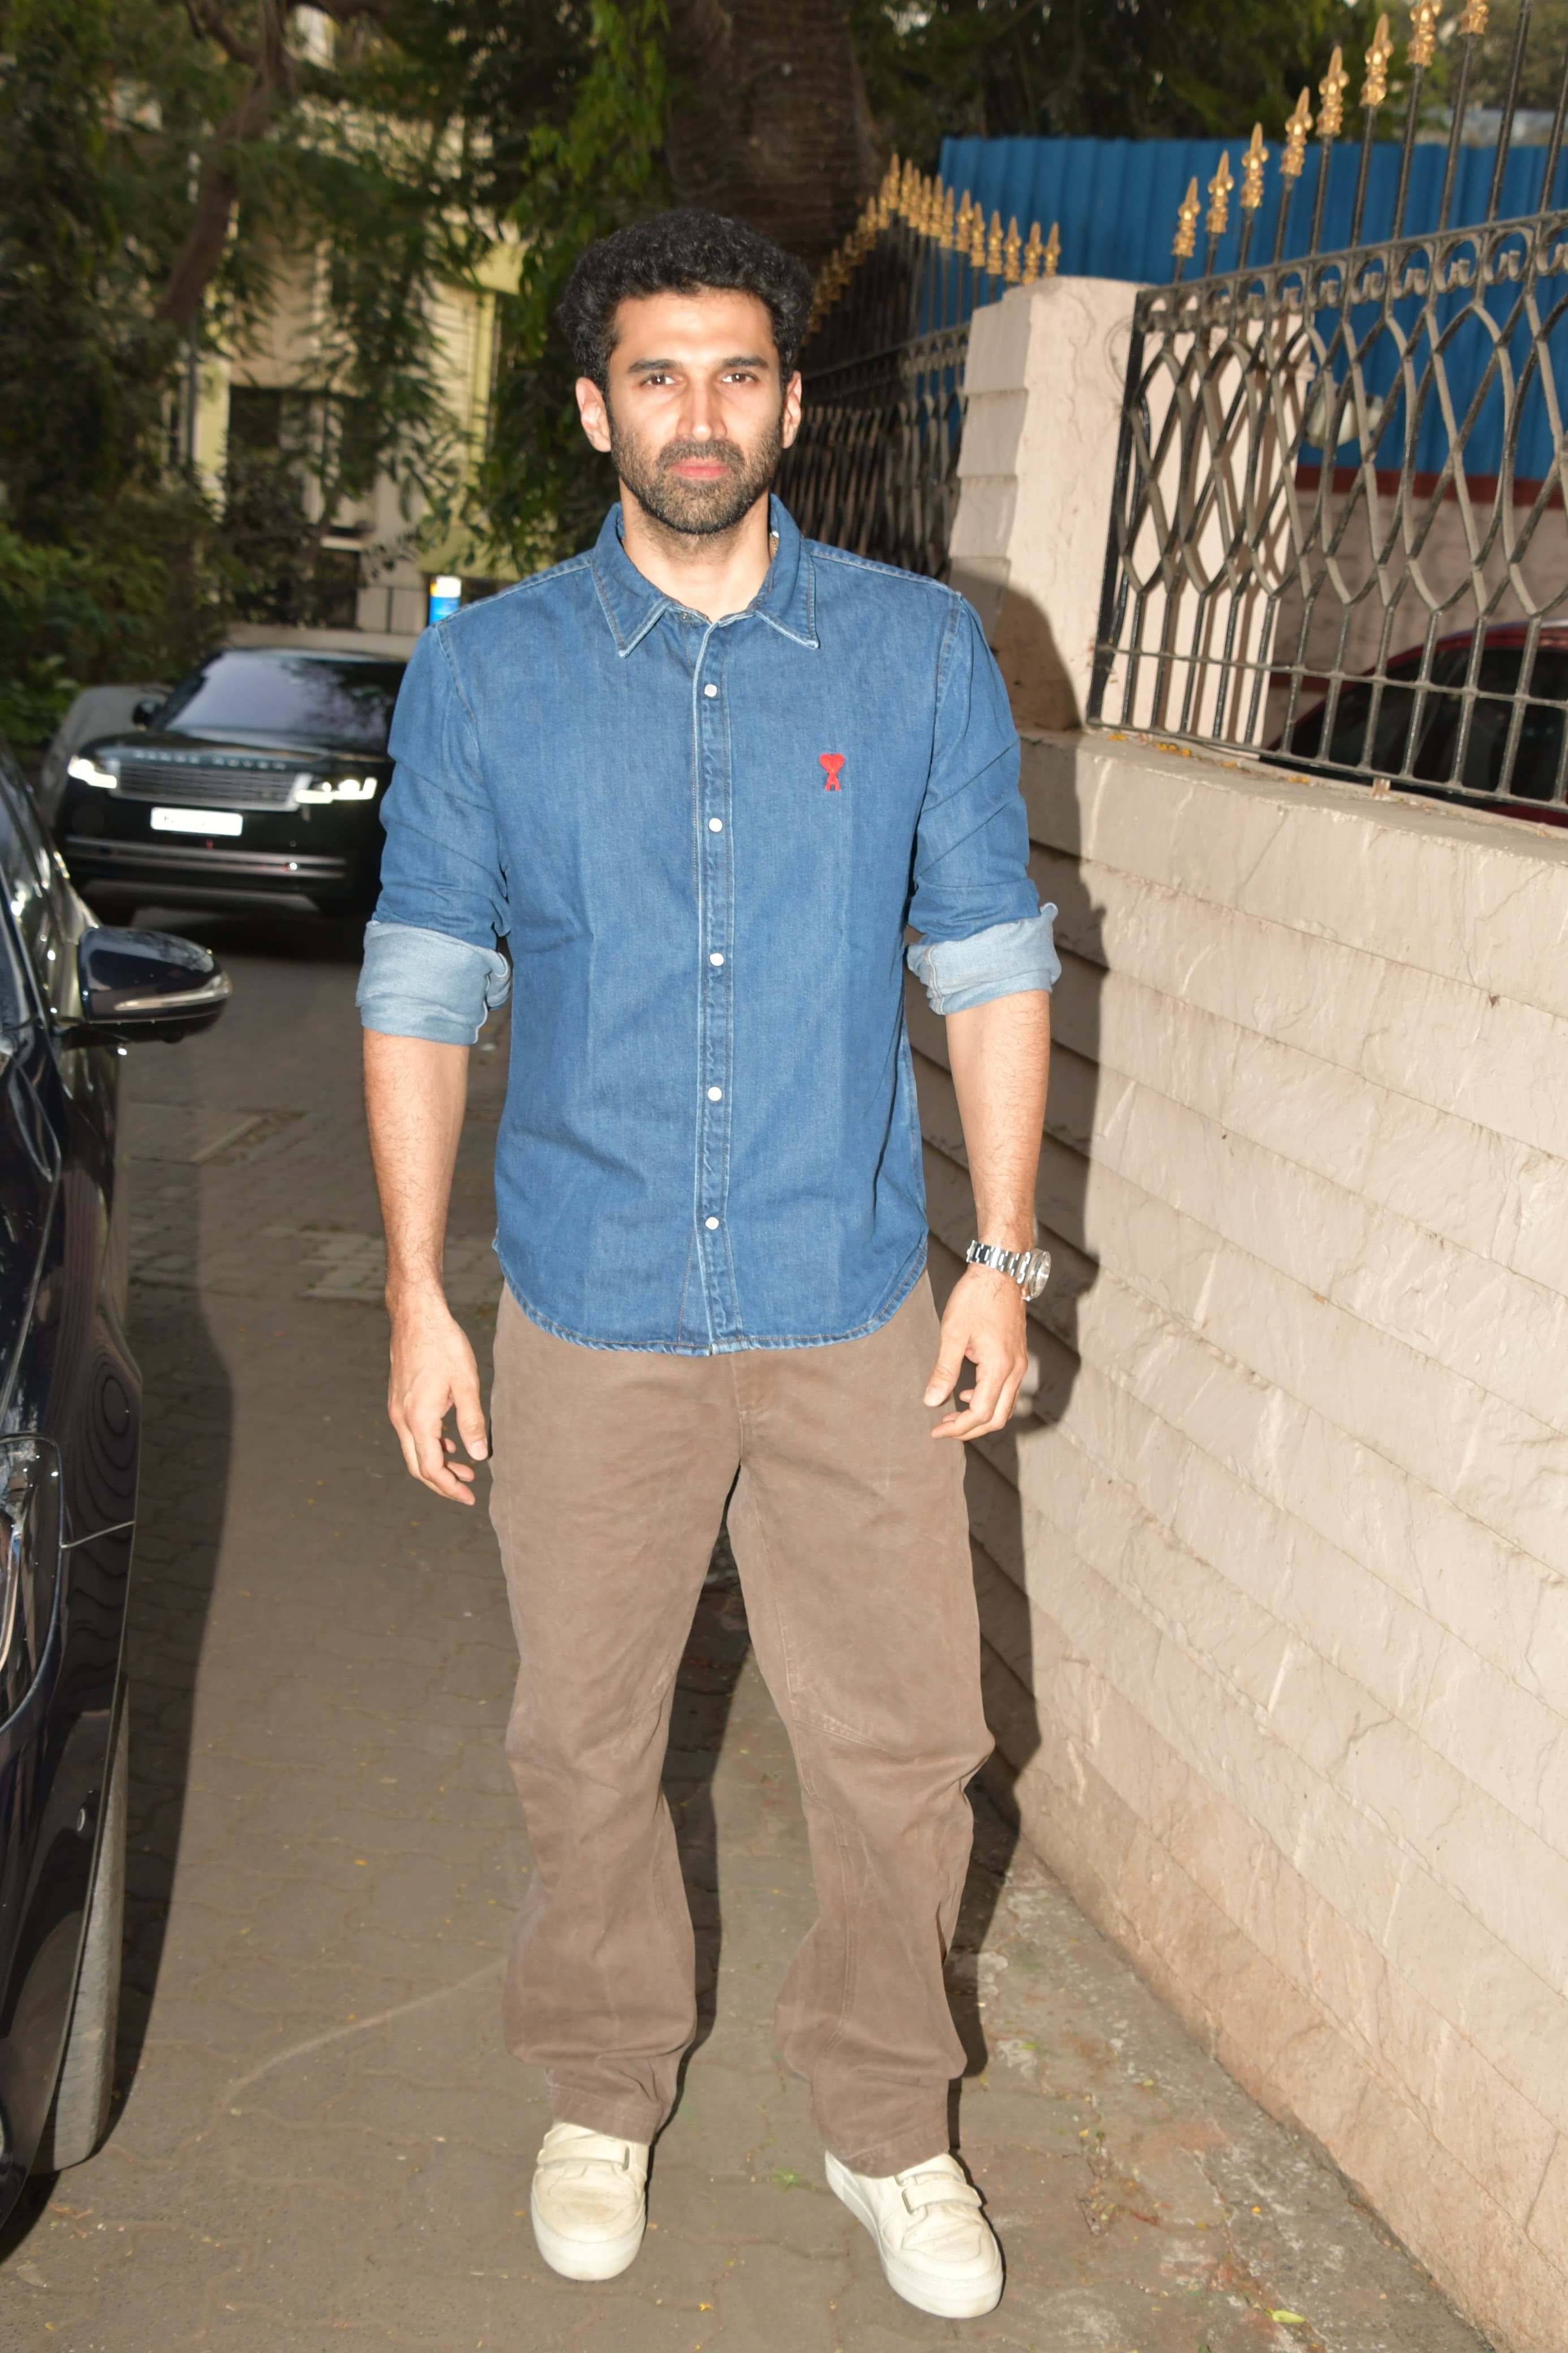 Ananya Panday's rumoured boyfriend Aditya Roy Kapur arrived at the house to take part in the festivities